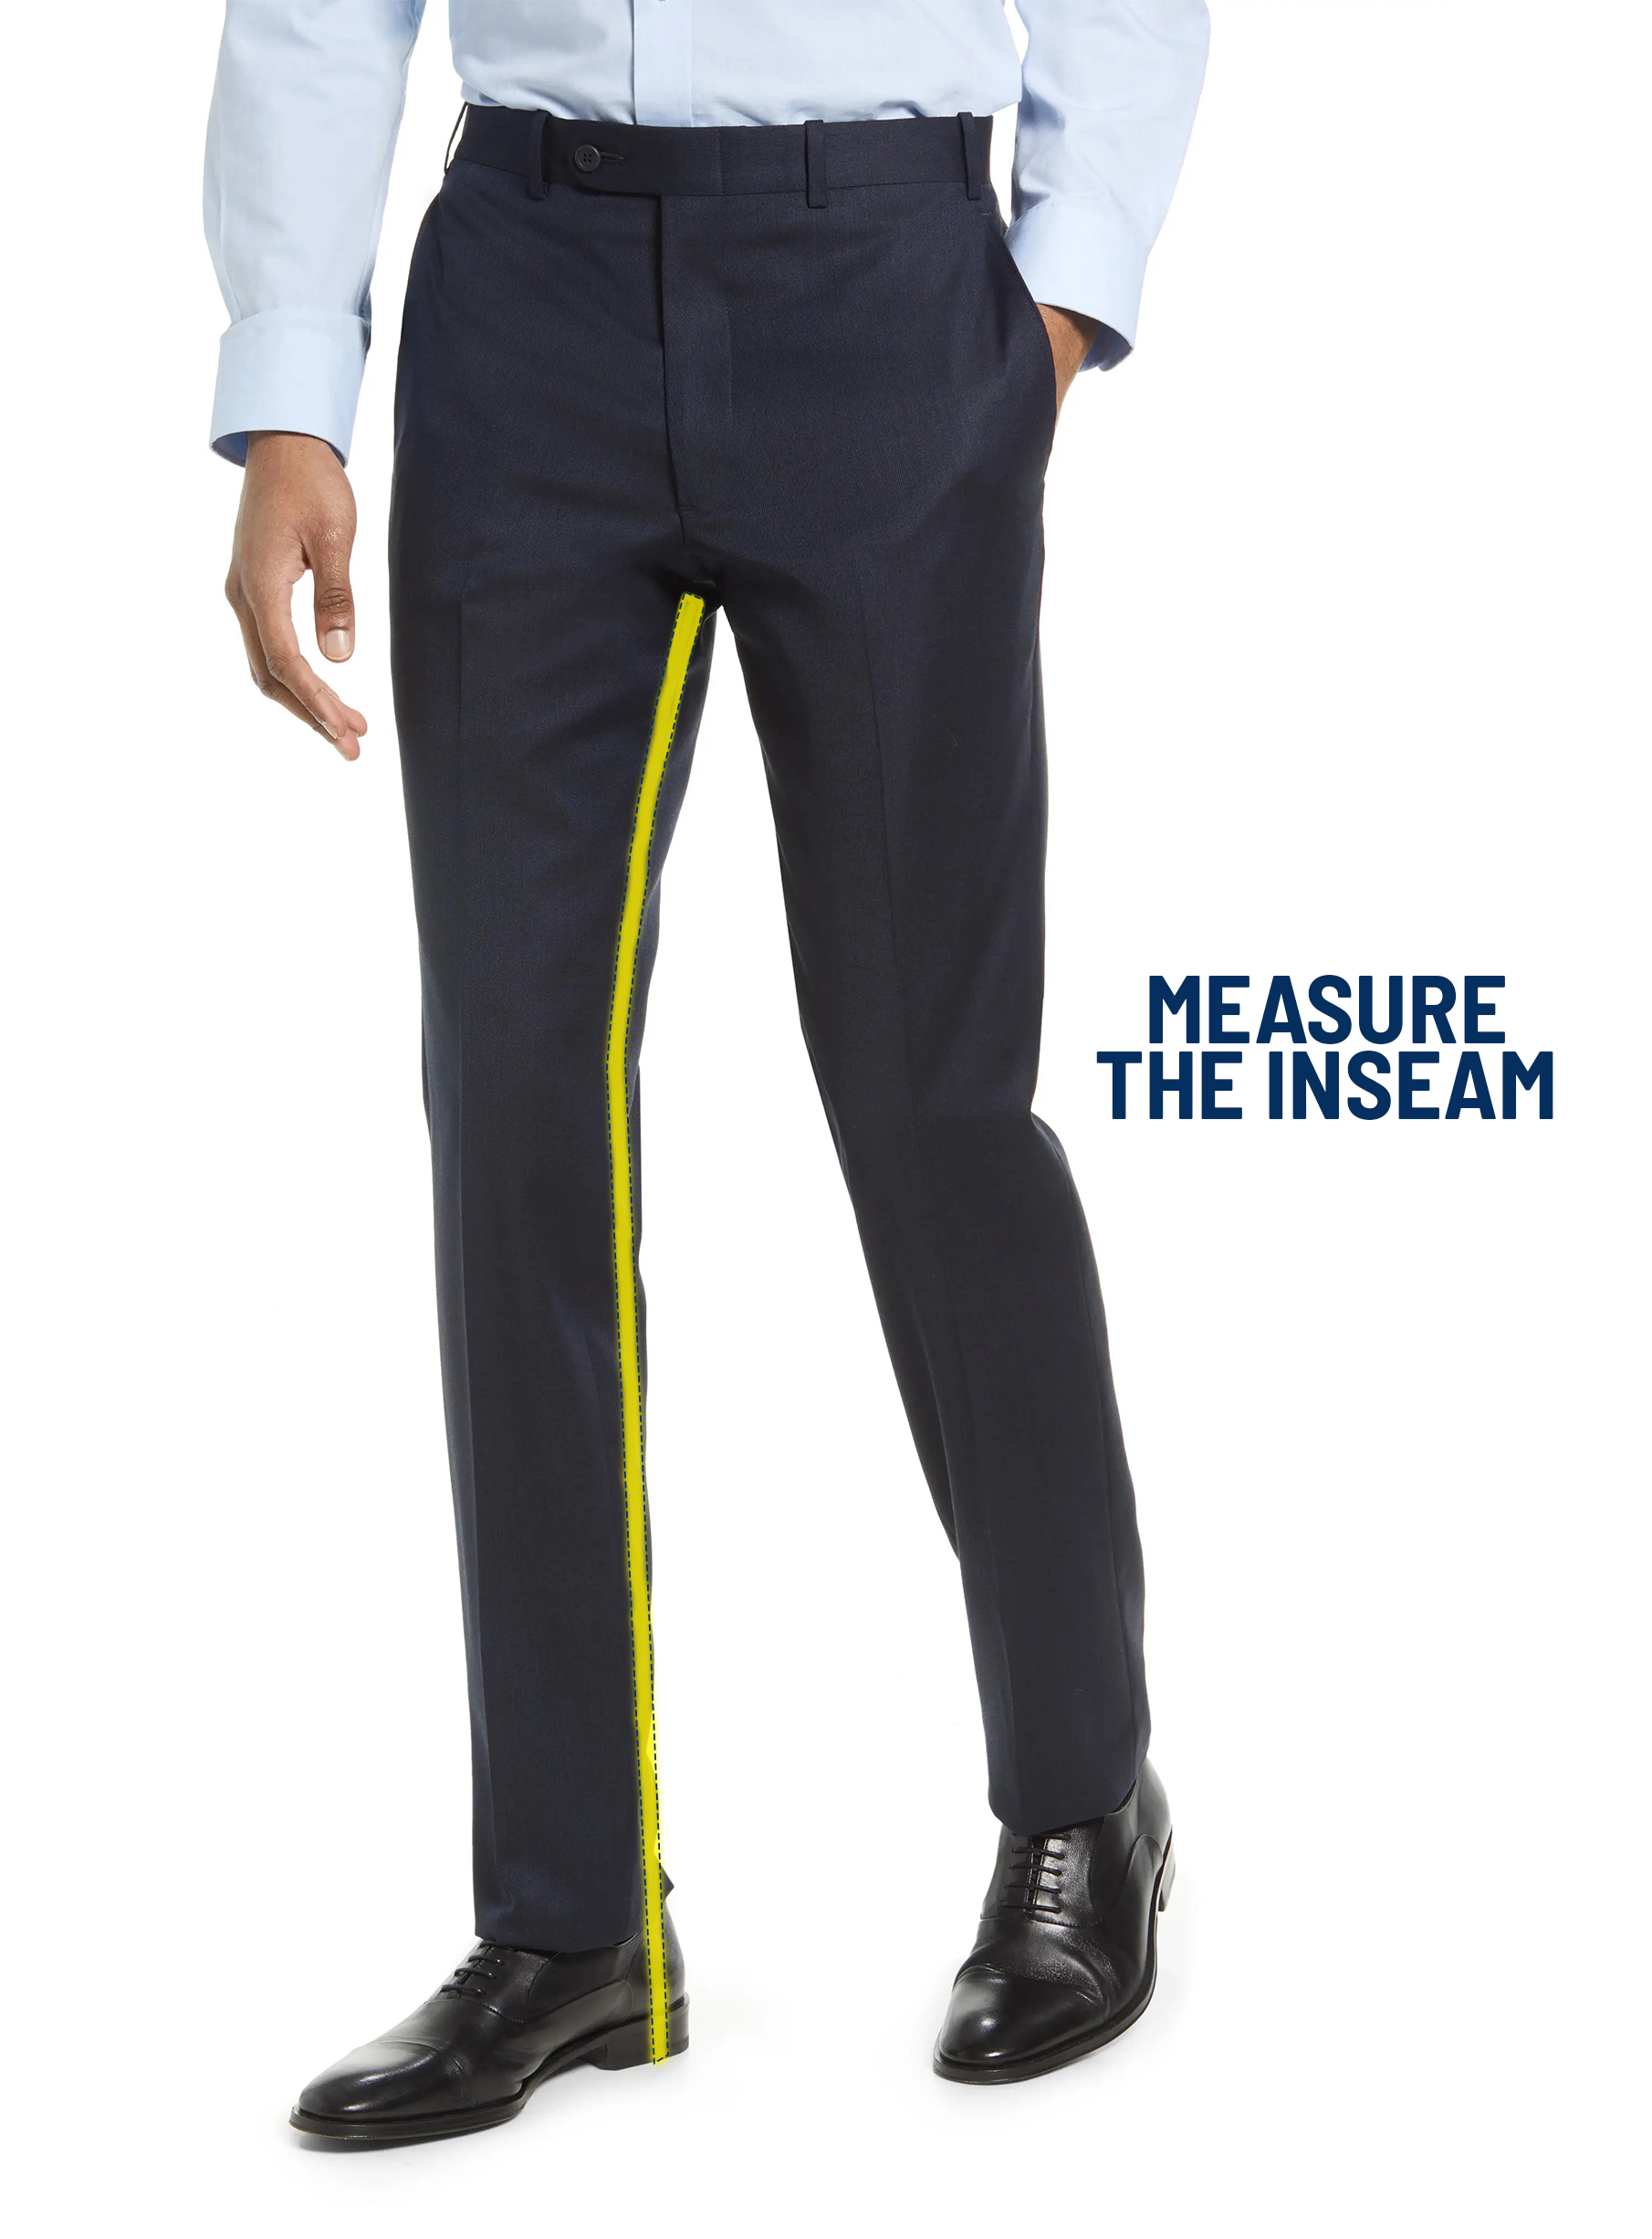 How to measure pants inseam